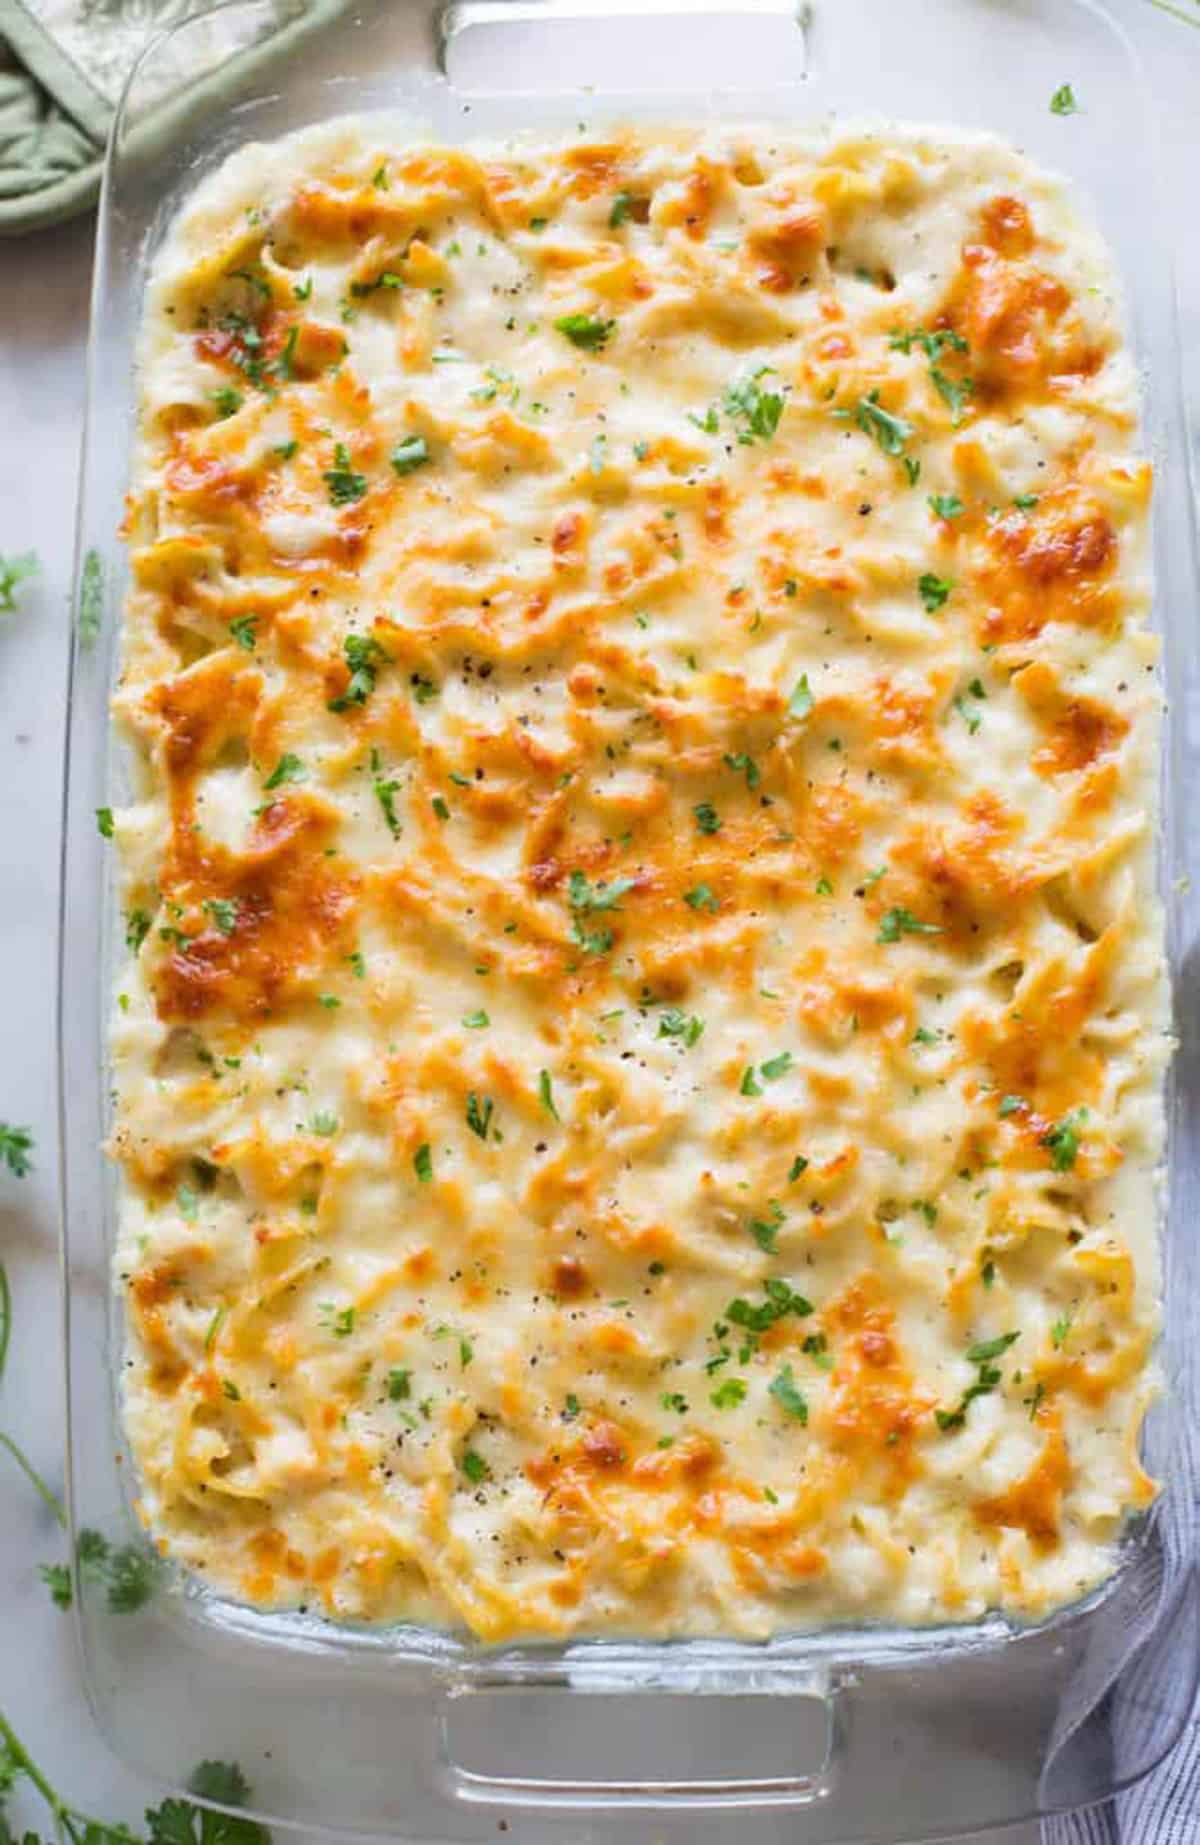 An easy Chicken Noodle Casserole recipe in a glass 9x13 dish, fresh out of the oven.